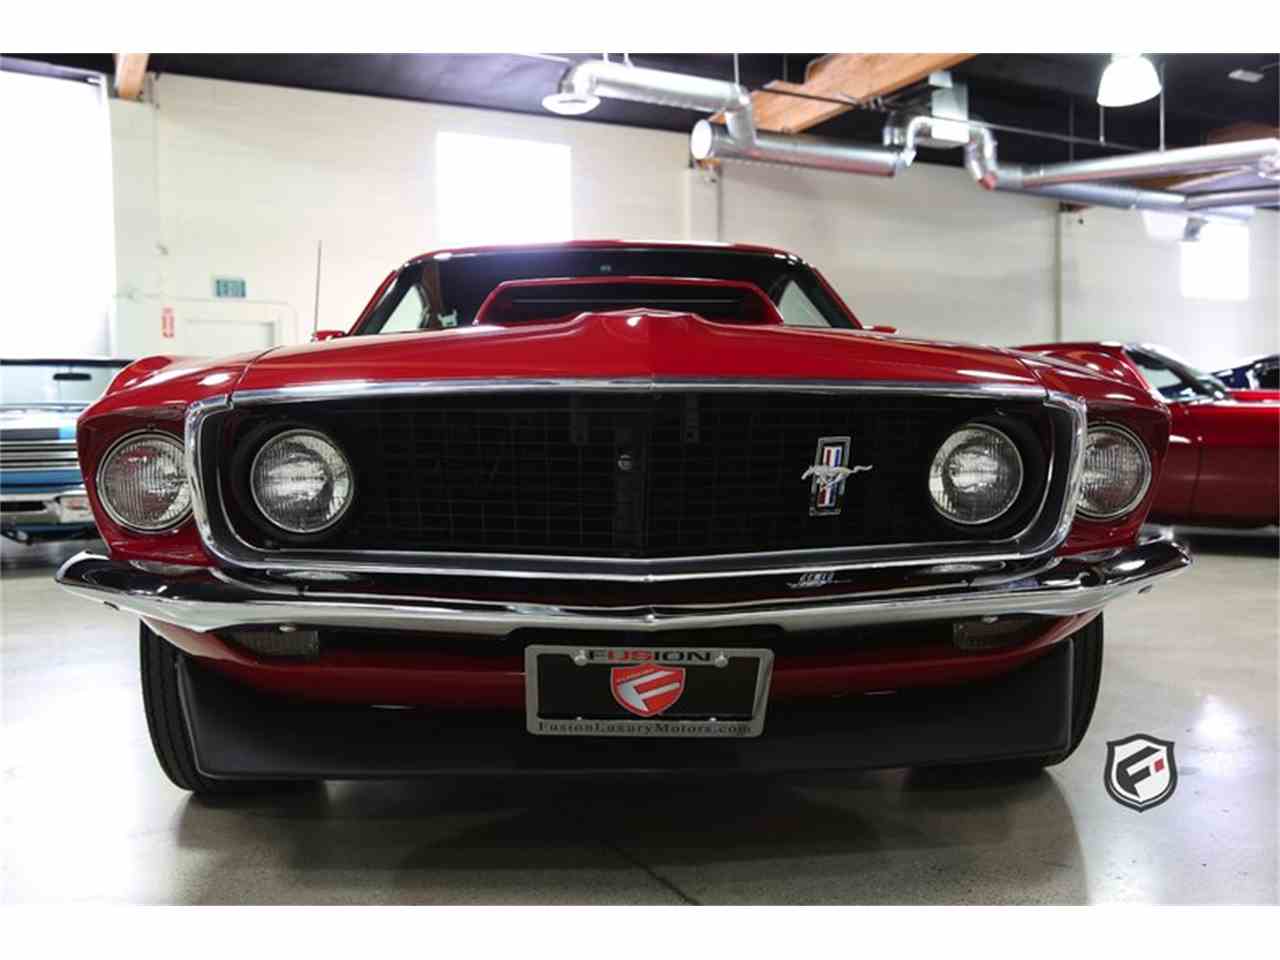 How Much Is A 1969 Boss 429 Mustang